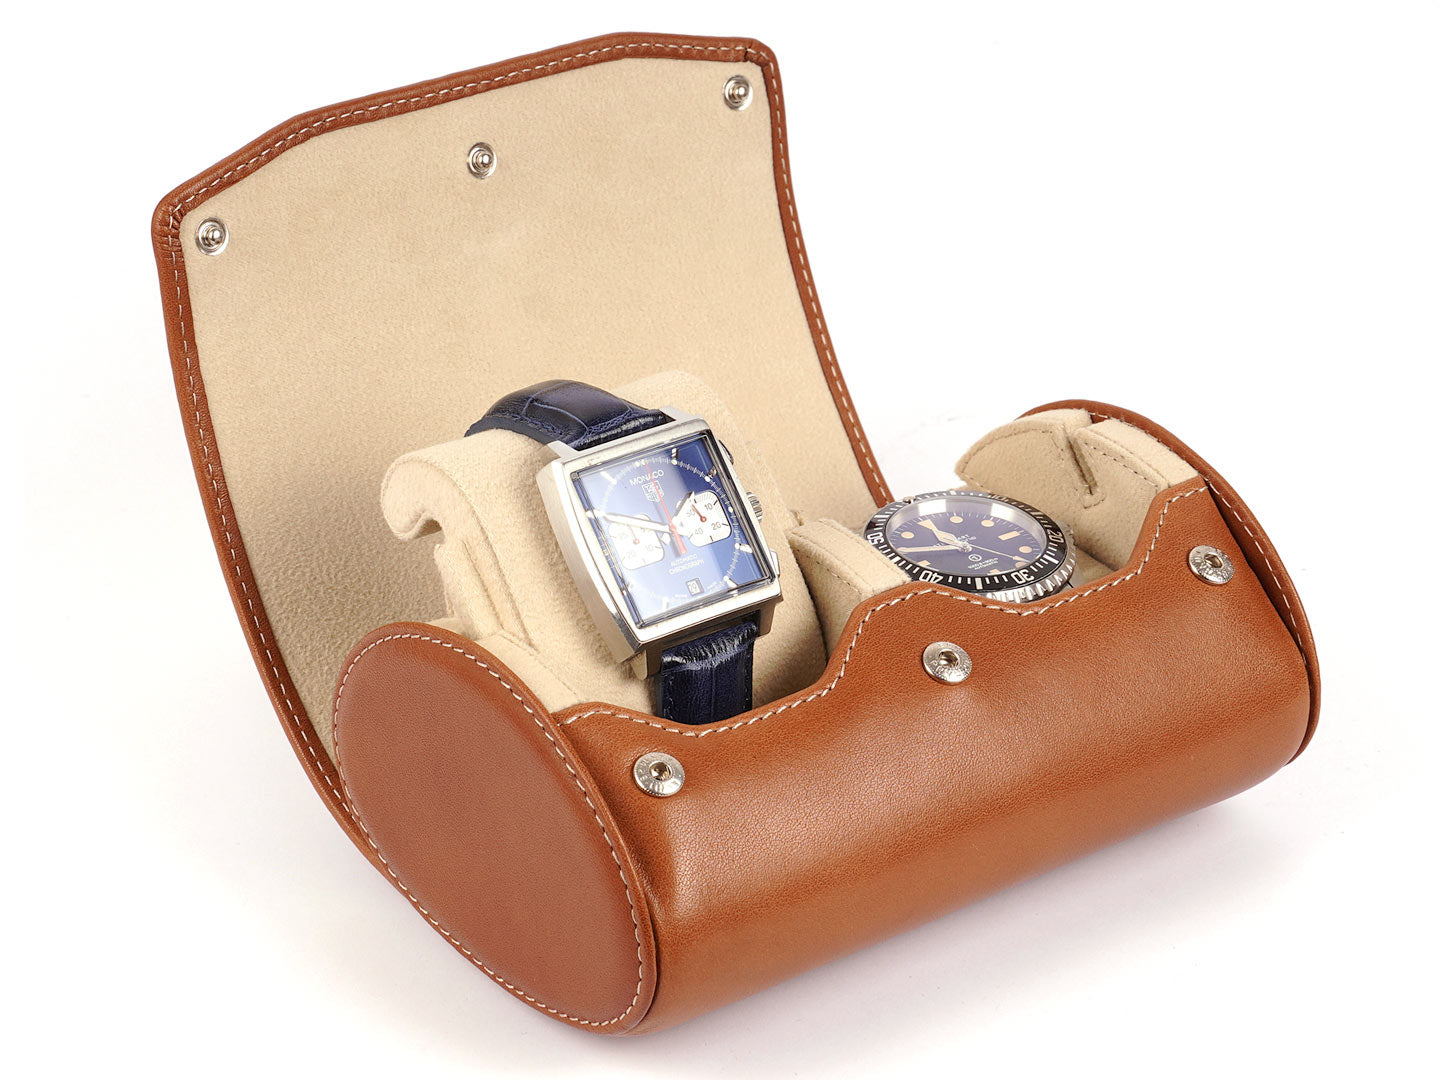 2-Uhrenrolle-Uhrenbox-Watch-Roll-Pouch-Etui-montres-Carapaz